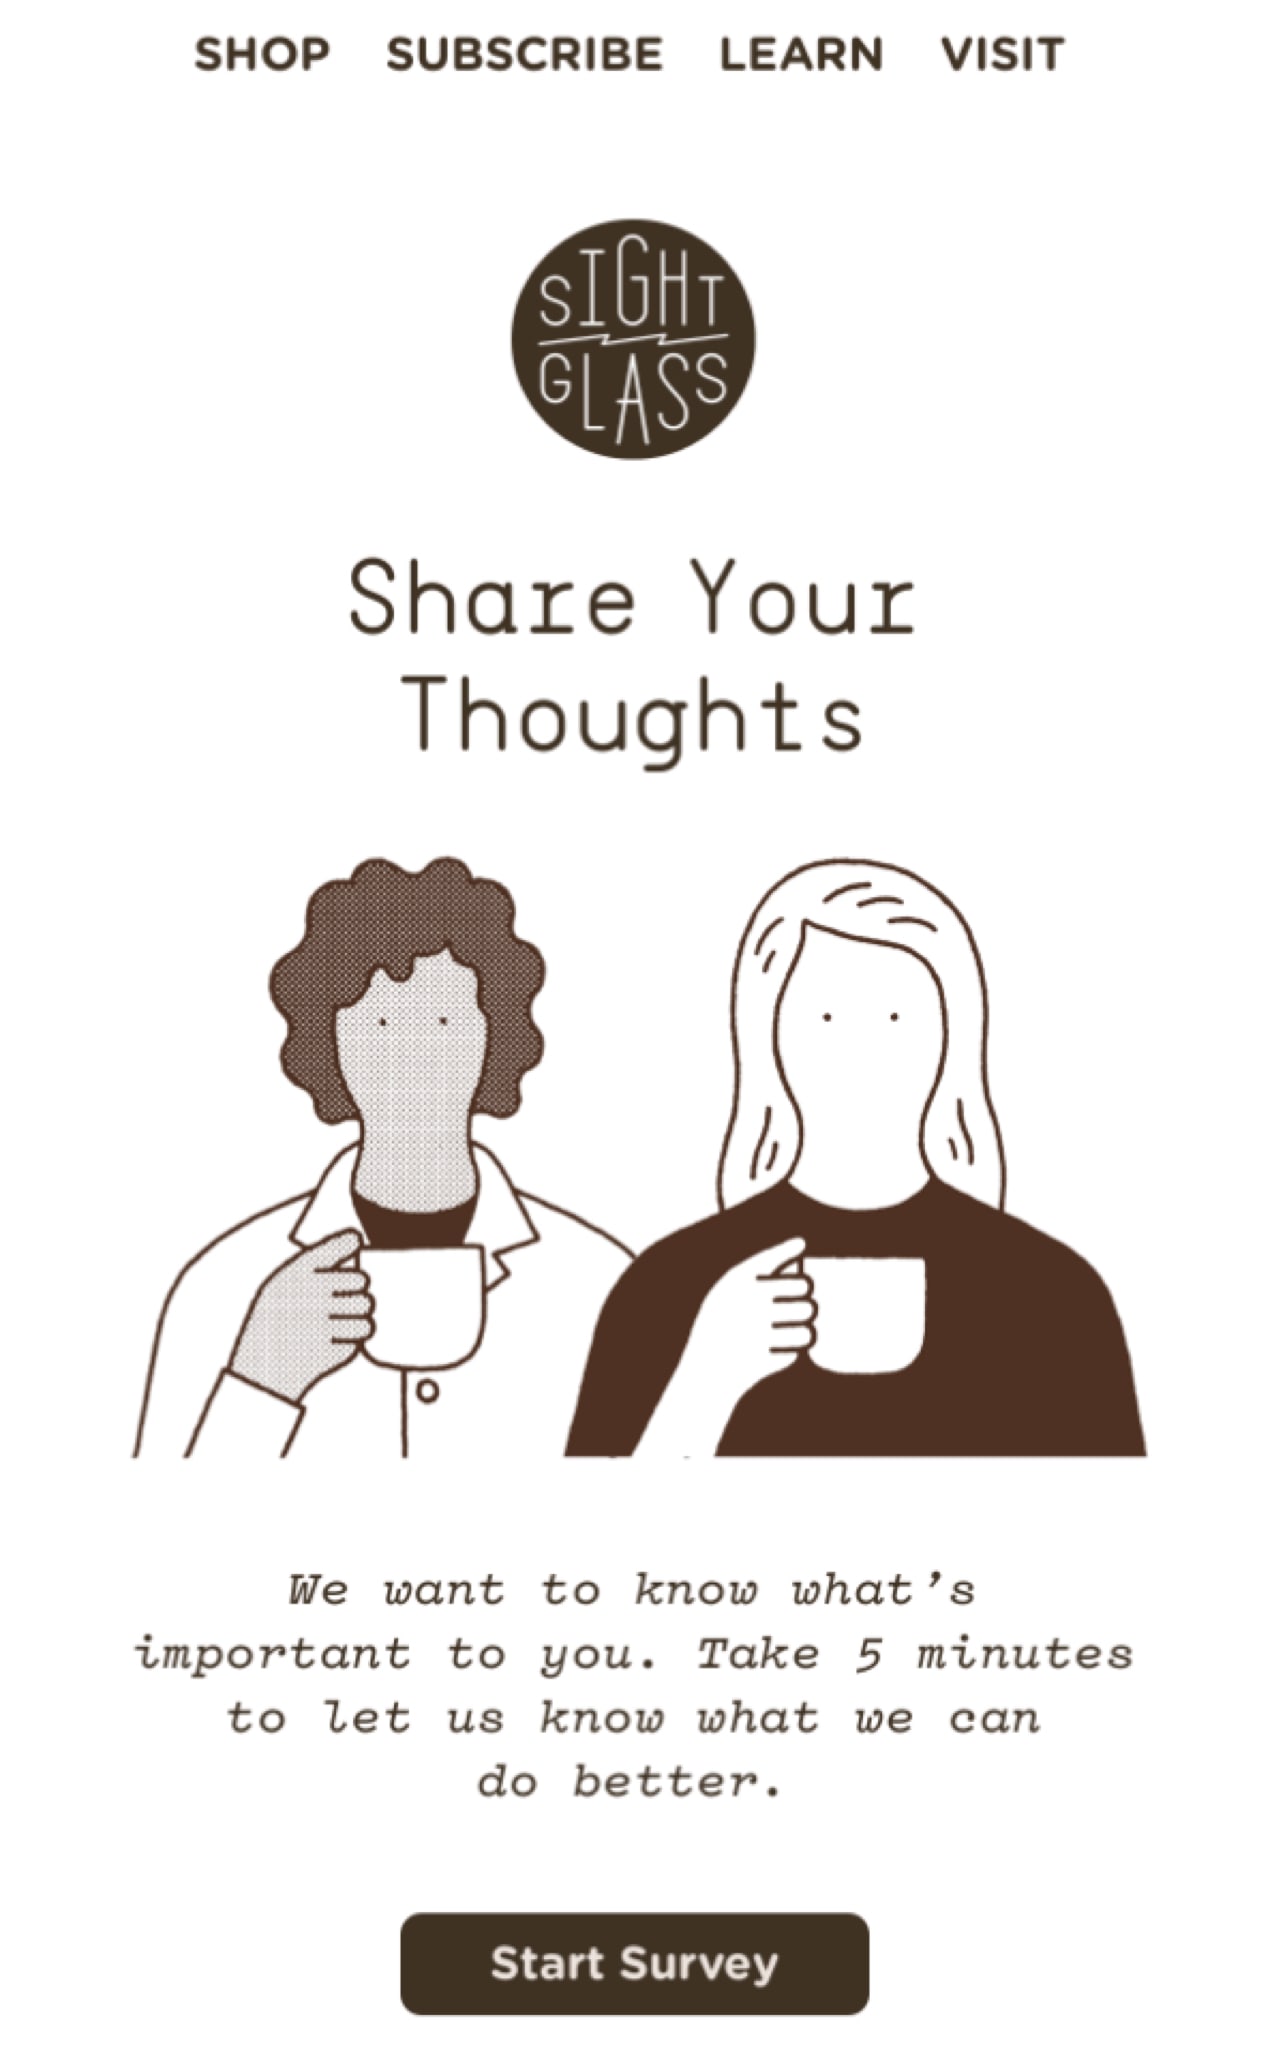 Sightglass survey email